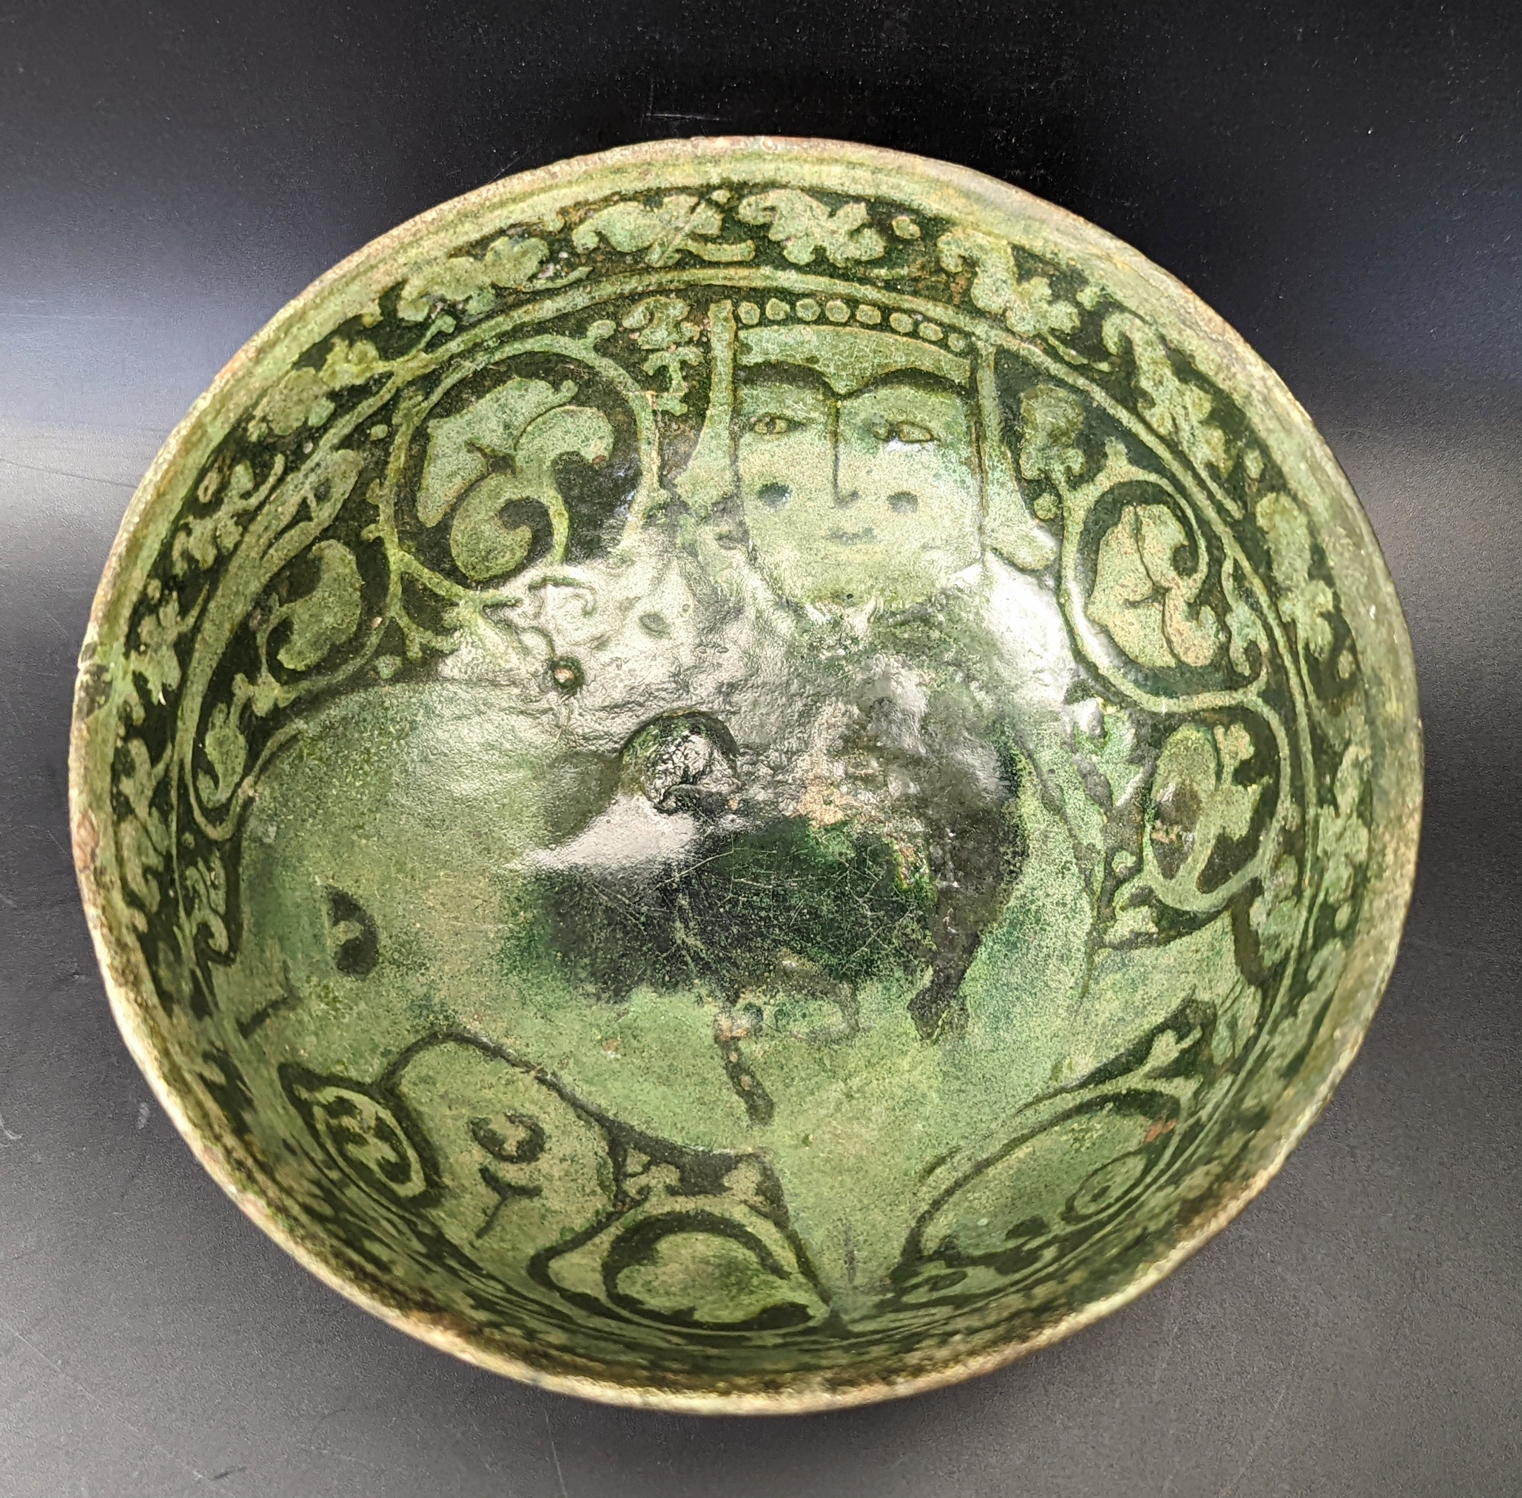 A rare 12th century Persian Garus ware green glazed pottery bowl depicting a mythical creature, H. - Image 2 of 5